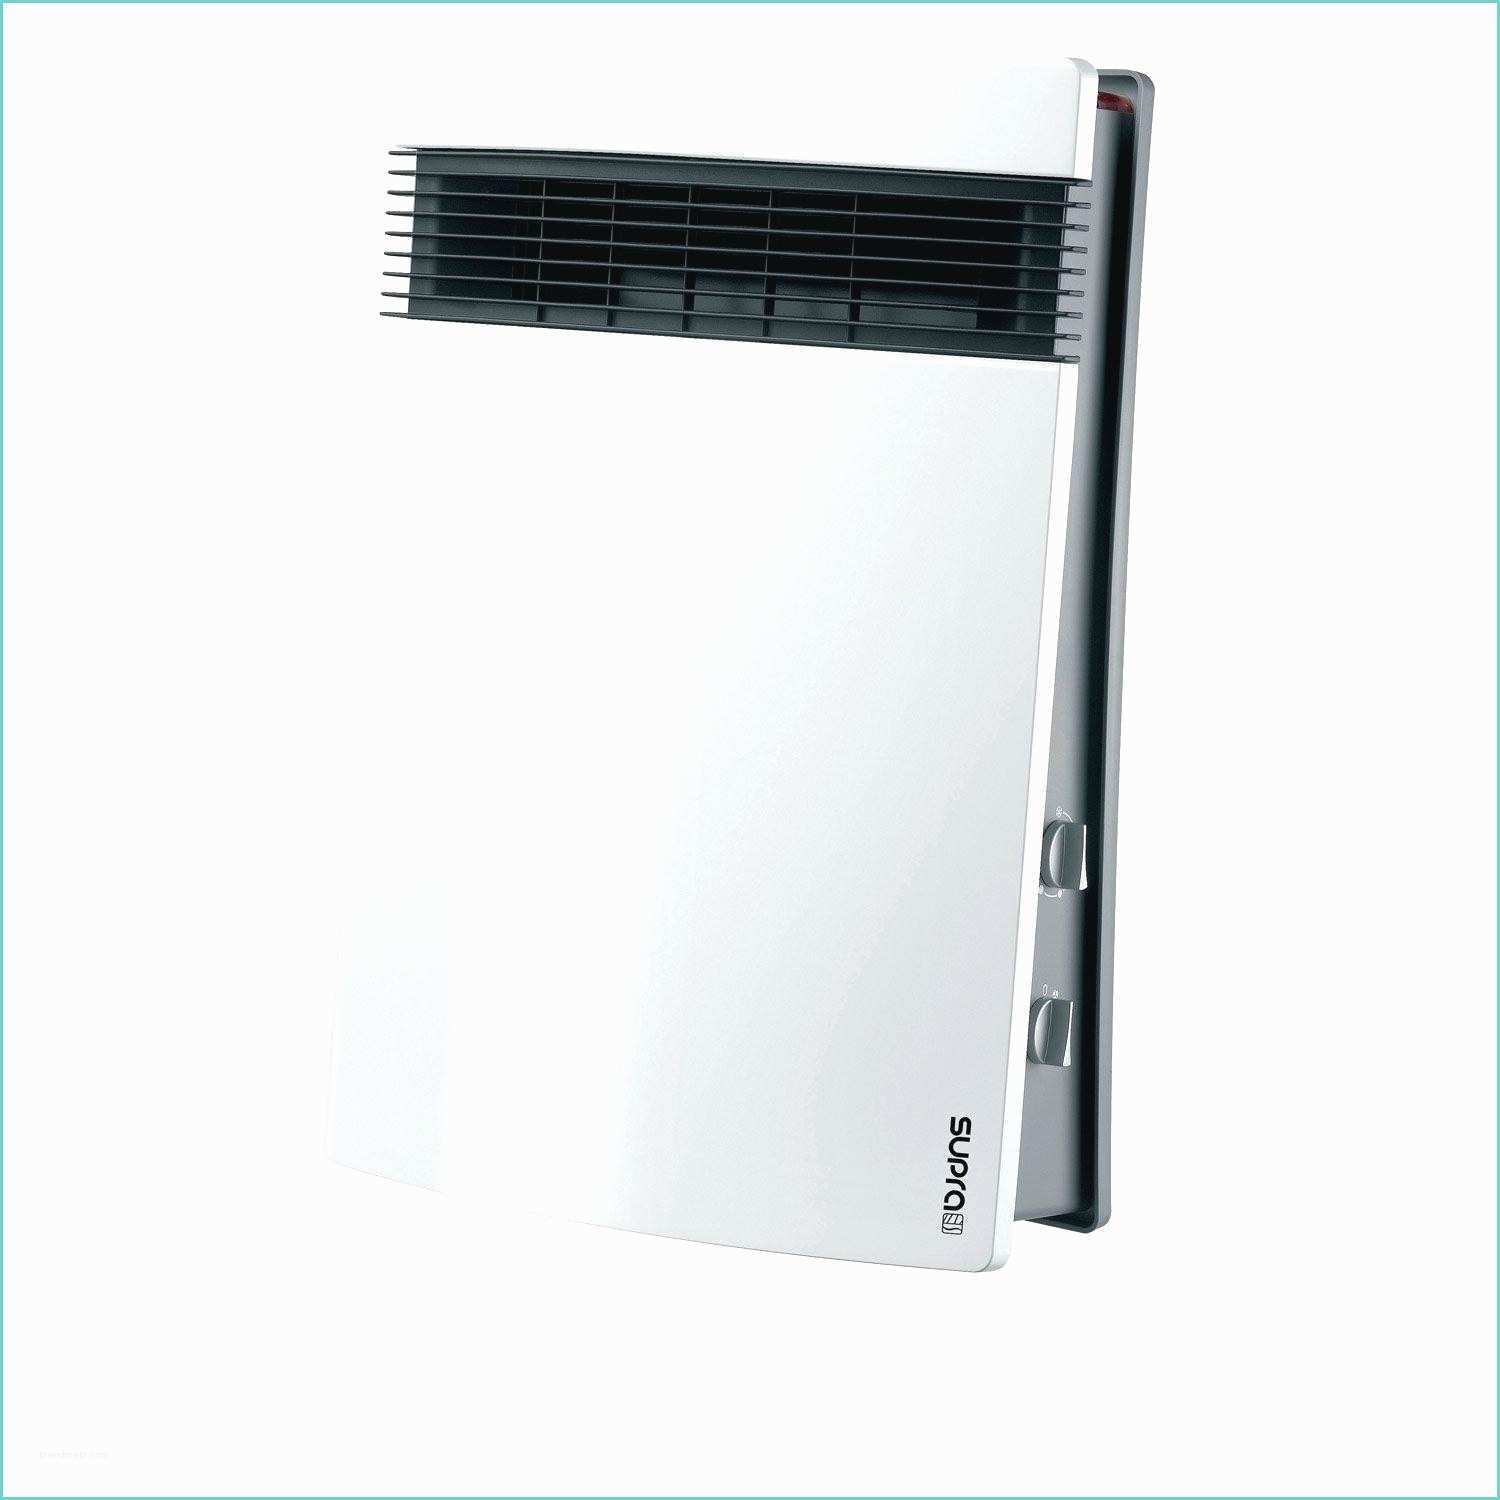 Chauffage Electrique Economique Leroy Merlin Support Mural Radiateur Fonte Support Rglable with